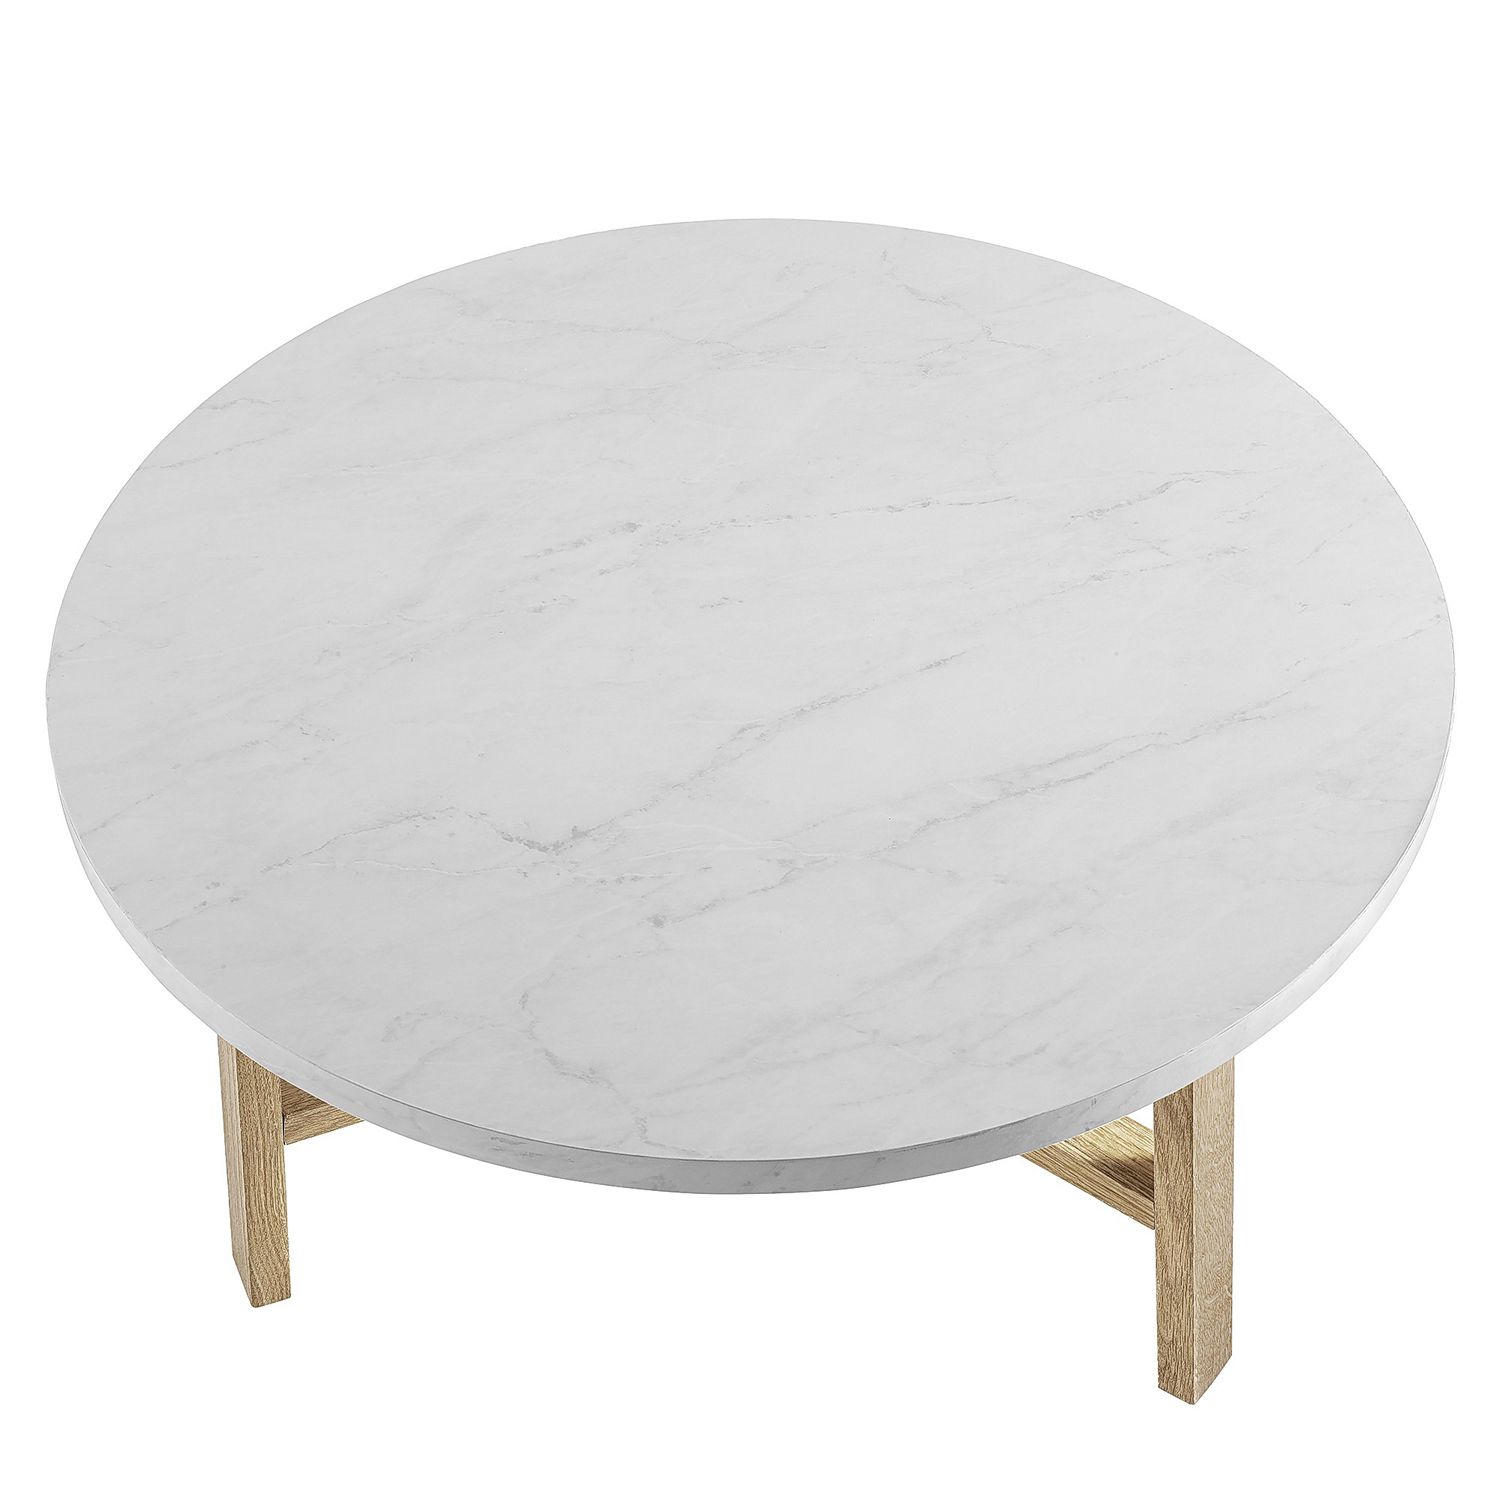 Modern White Faux Marble Round Coffee Table – Pier1 With Modern Round Faux Marble Coffee Tables (View 6 of 15)